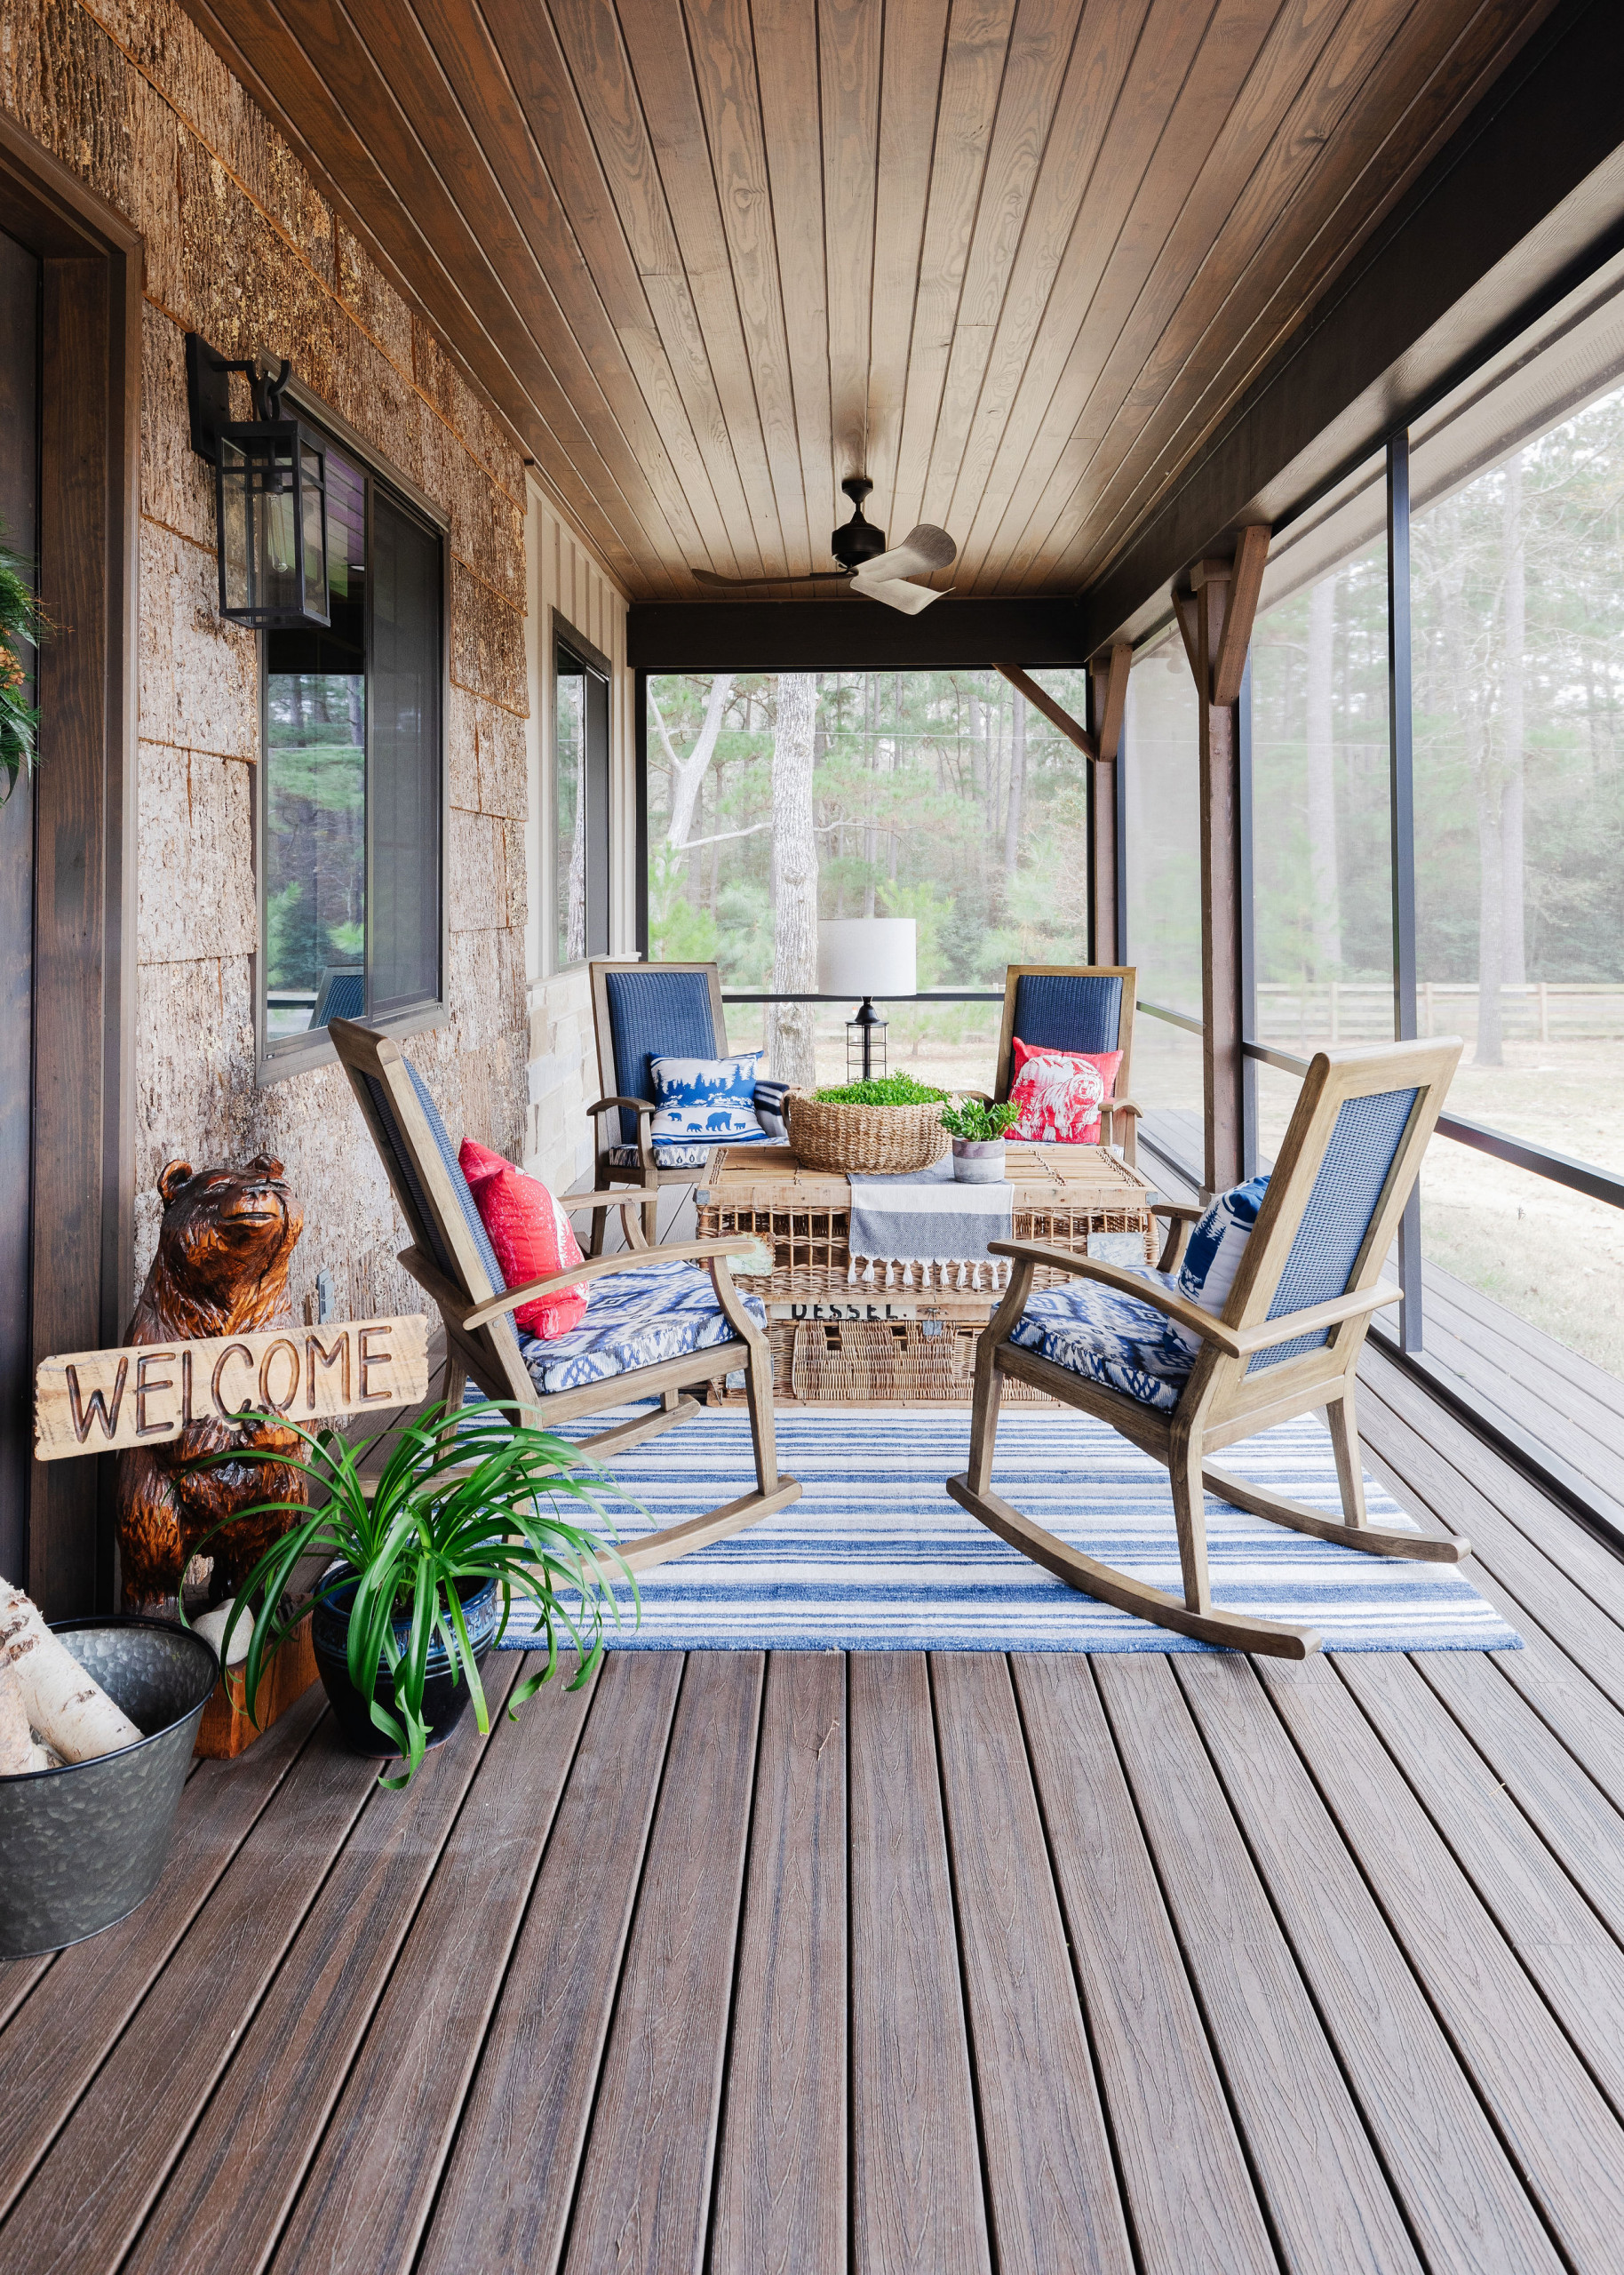 18 Phenomenal Rustic Porch Designs That Will Make You Drool